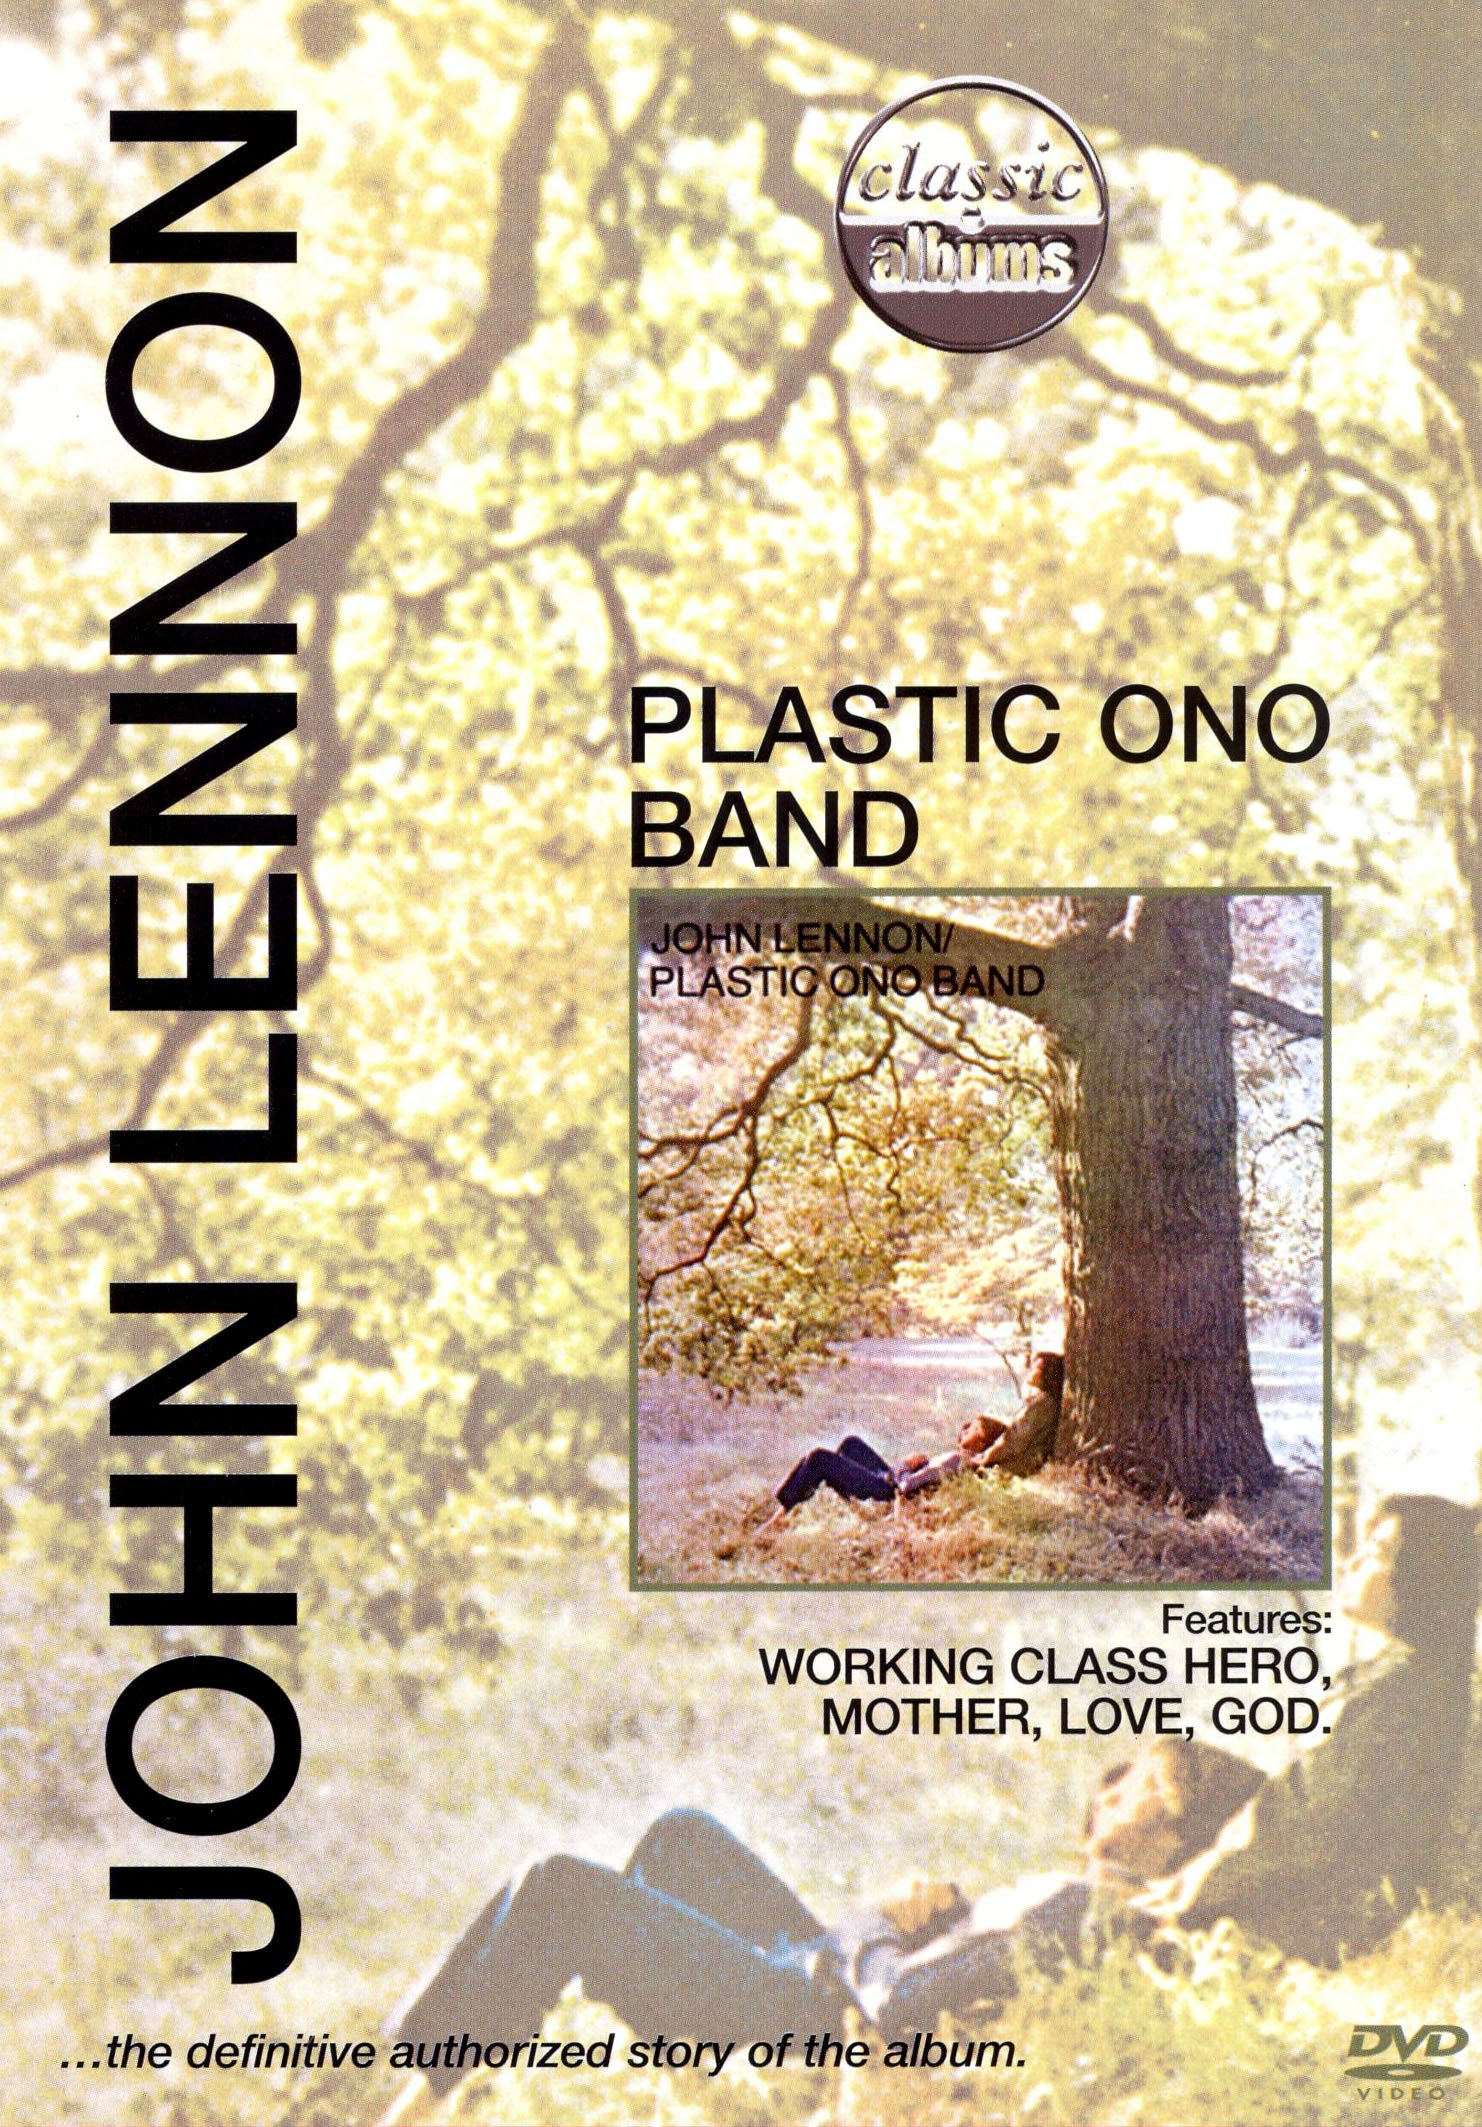 Classic Albums: Plastic Ono Band [DVD] cover art